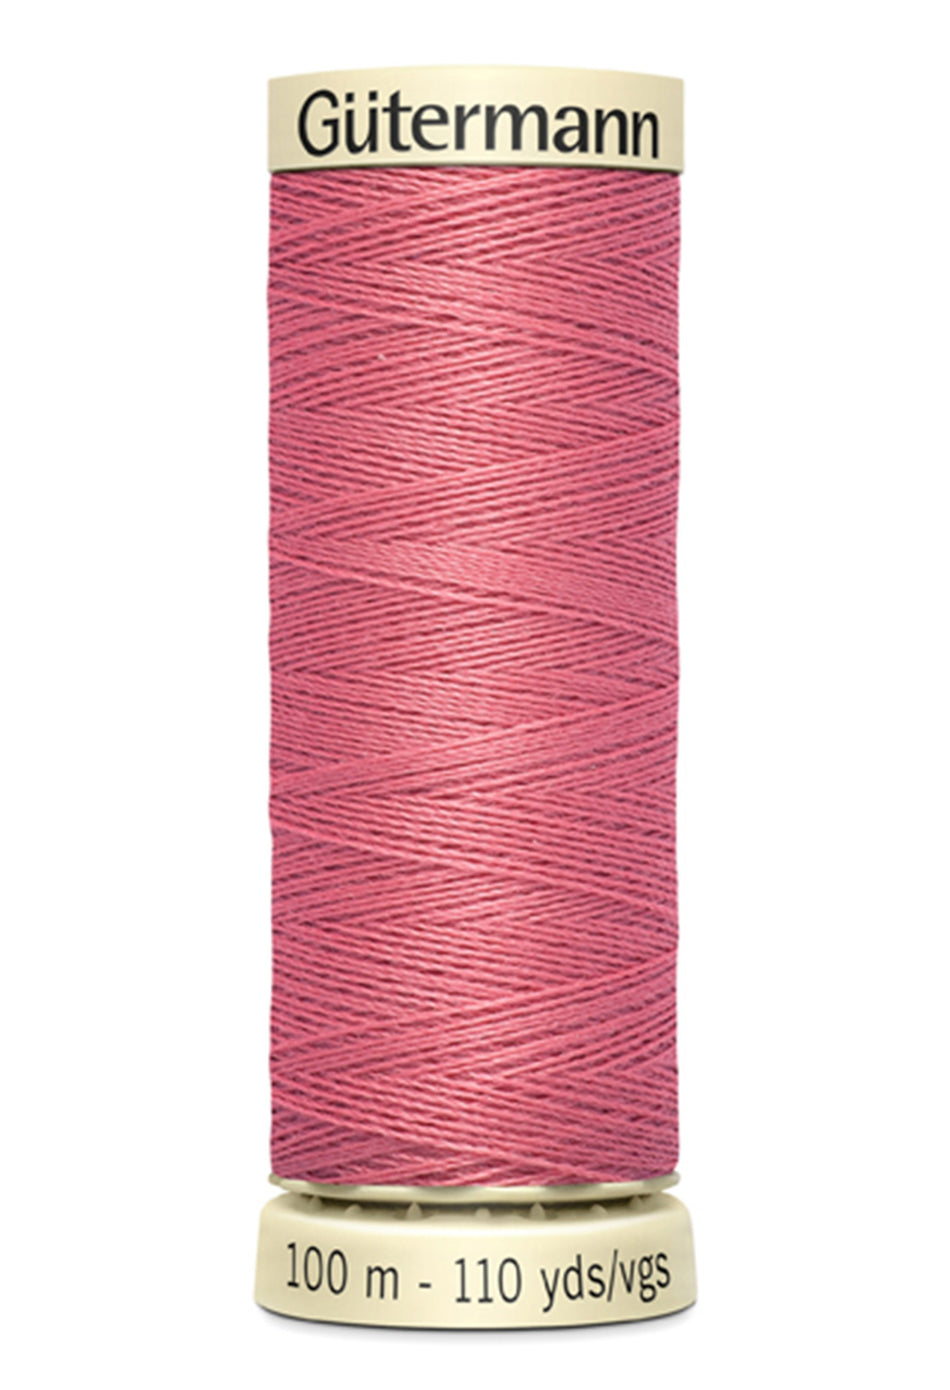 Gutermann Sew-All Polyester 350 South Sea Pink 100m/110yd